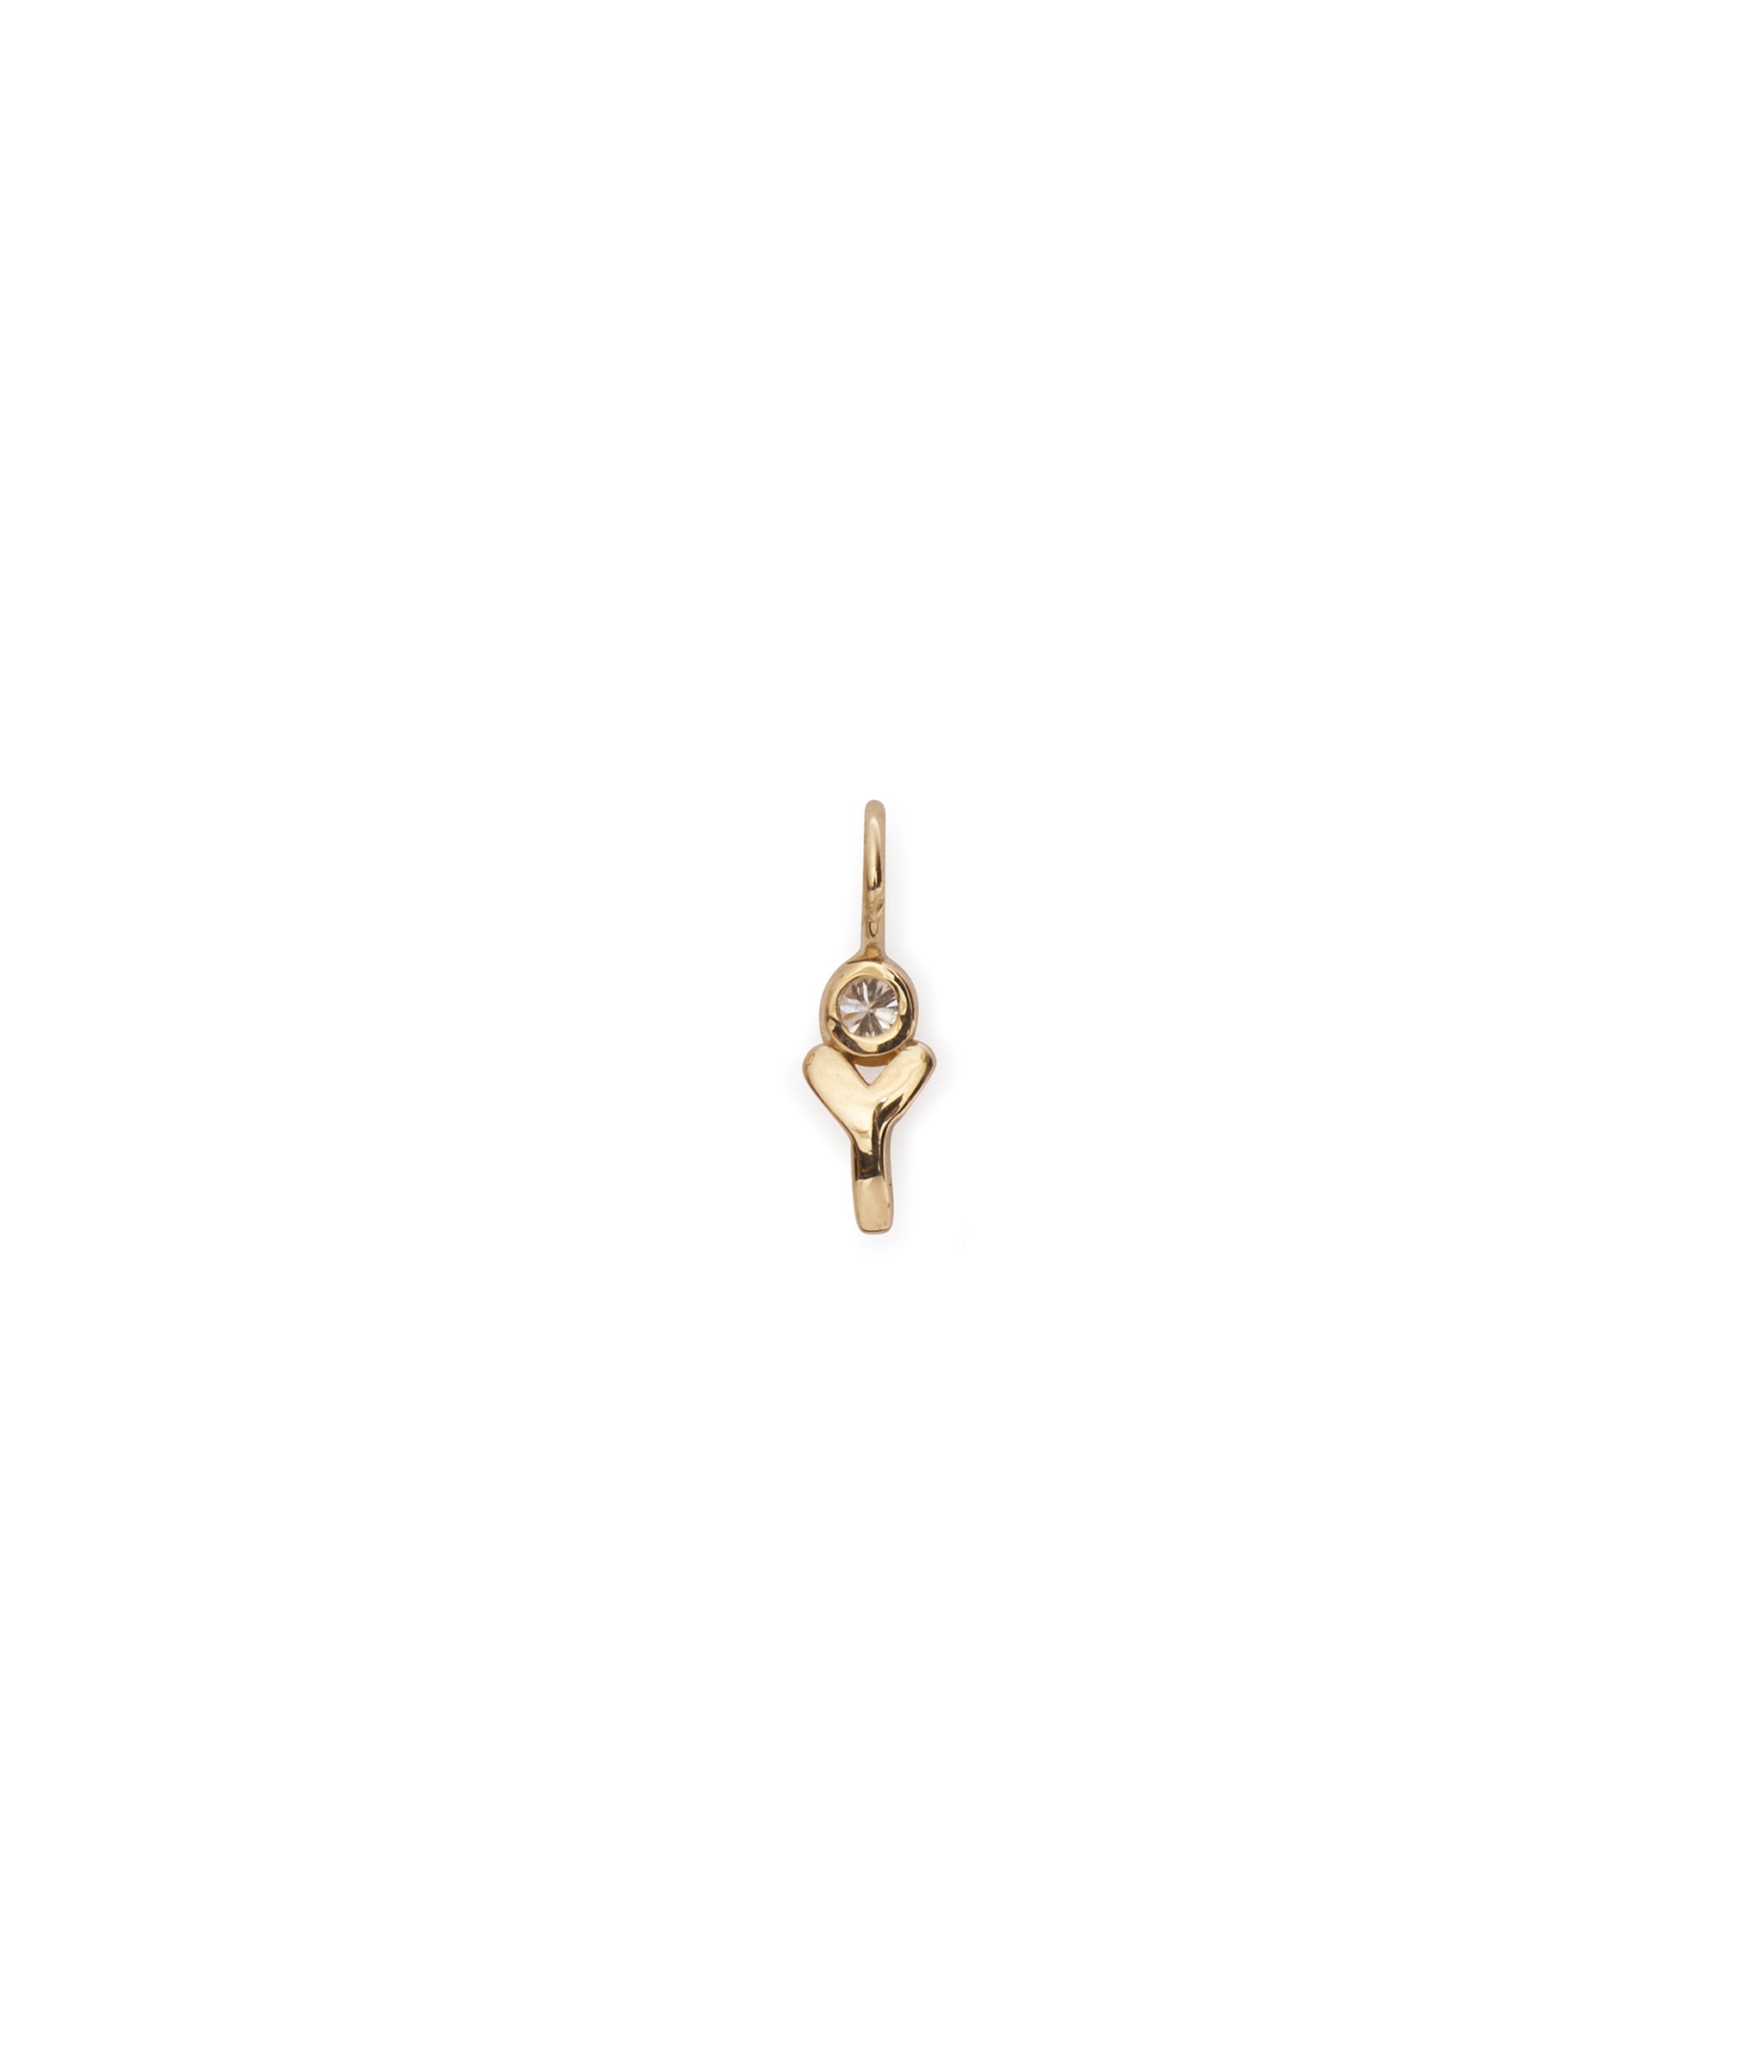 Alphabet Soup "Y" Charm. Puffy mini 14k gold letter "Y" charm with round diamond accent.